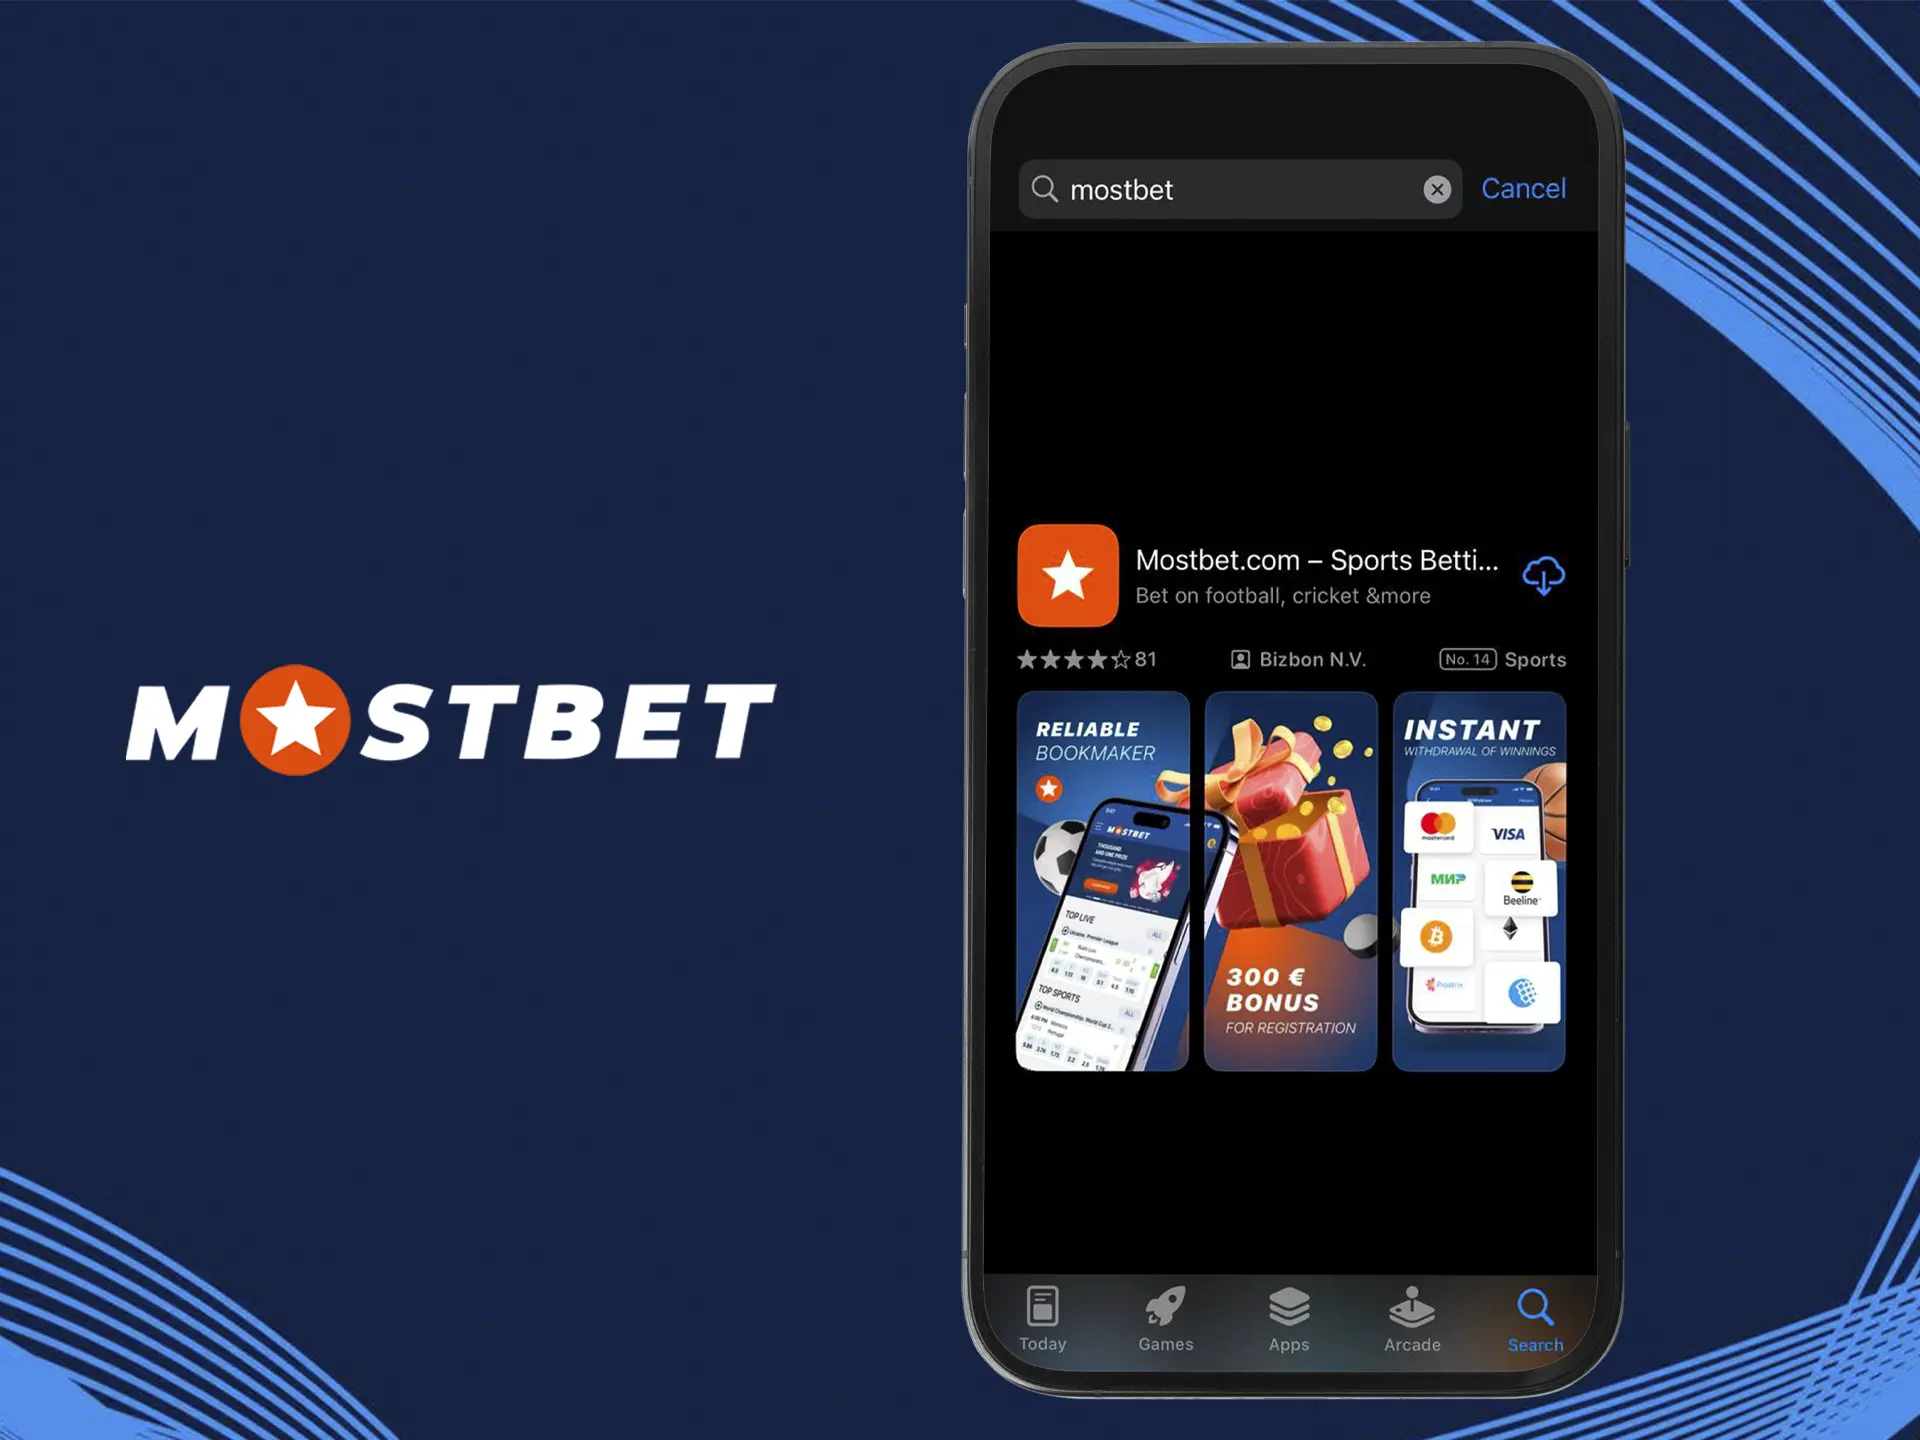 Select Mostbet from the list of apps found.